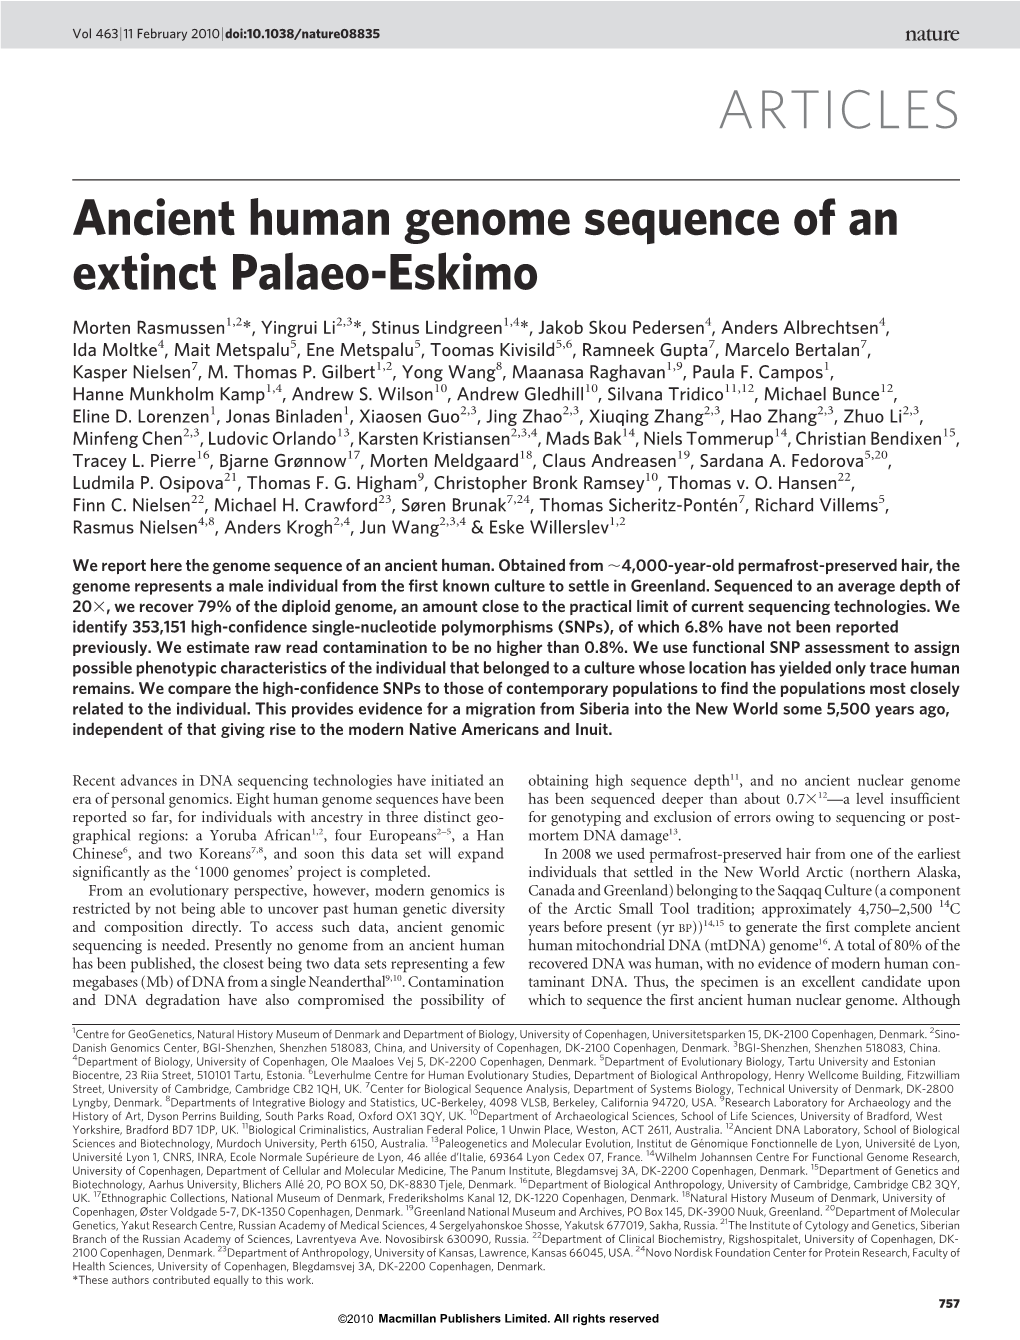 Ancient Human Genome Sequence of an Extinct Palaeo-Eskimo